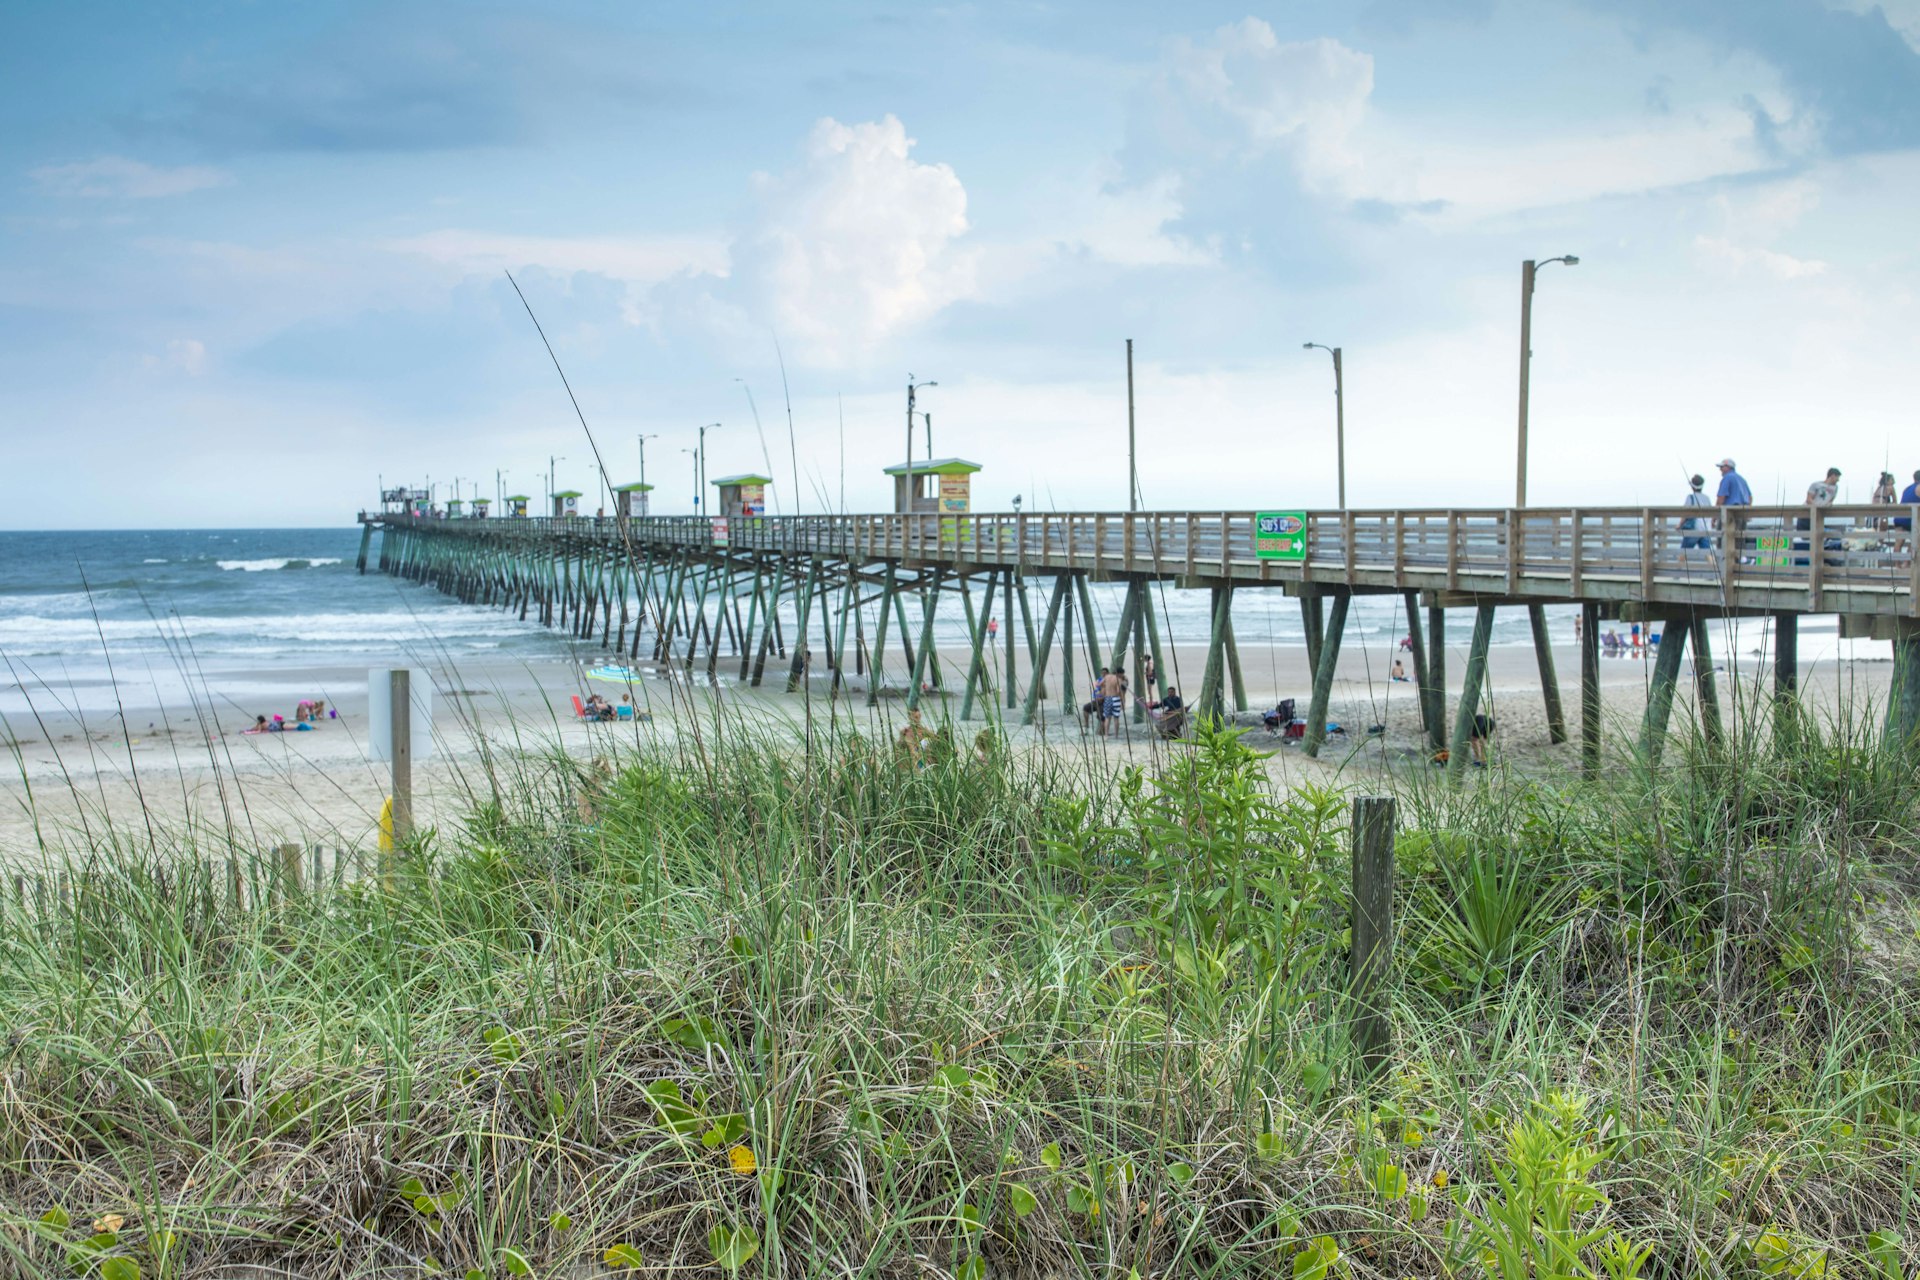 A long wooden fishing pier, seen from behind the dunes with grass in the foreground